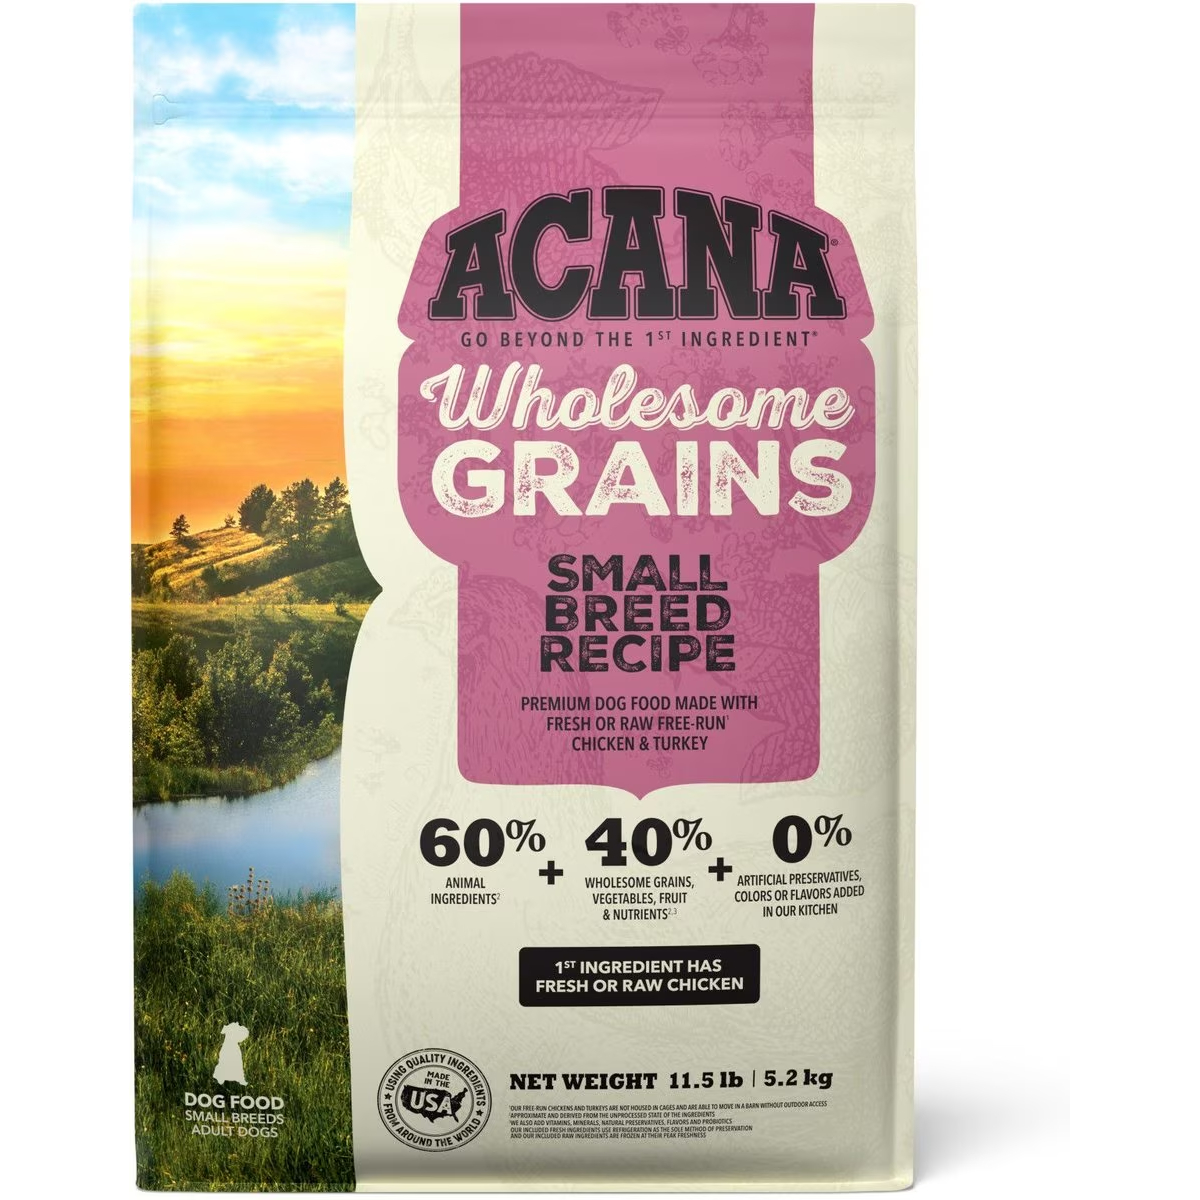 ACANA Wholesome Grains Small Breed Recipe Dry Dog Food